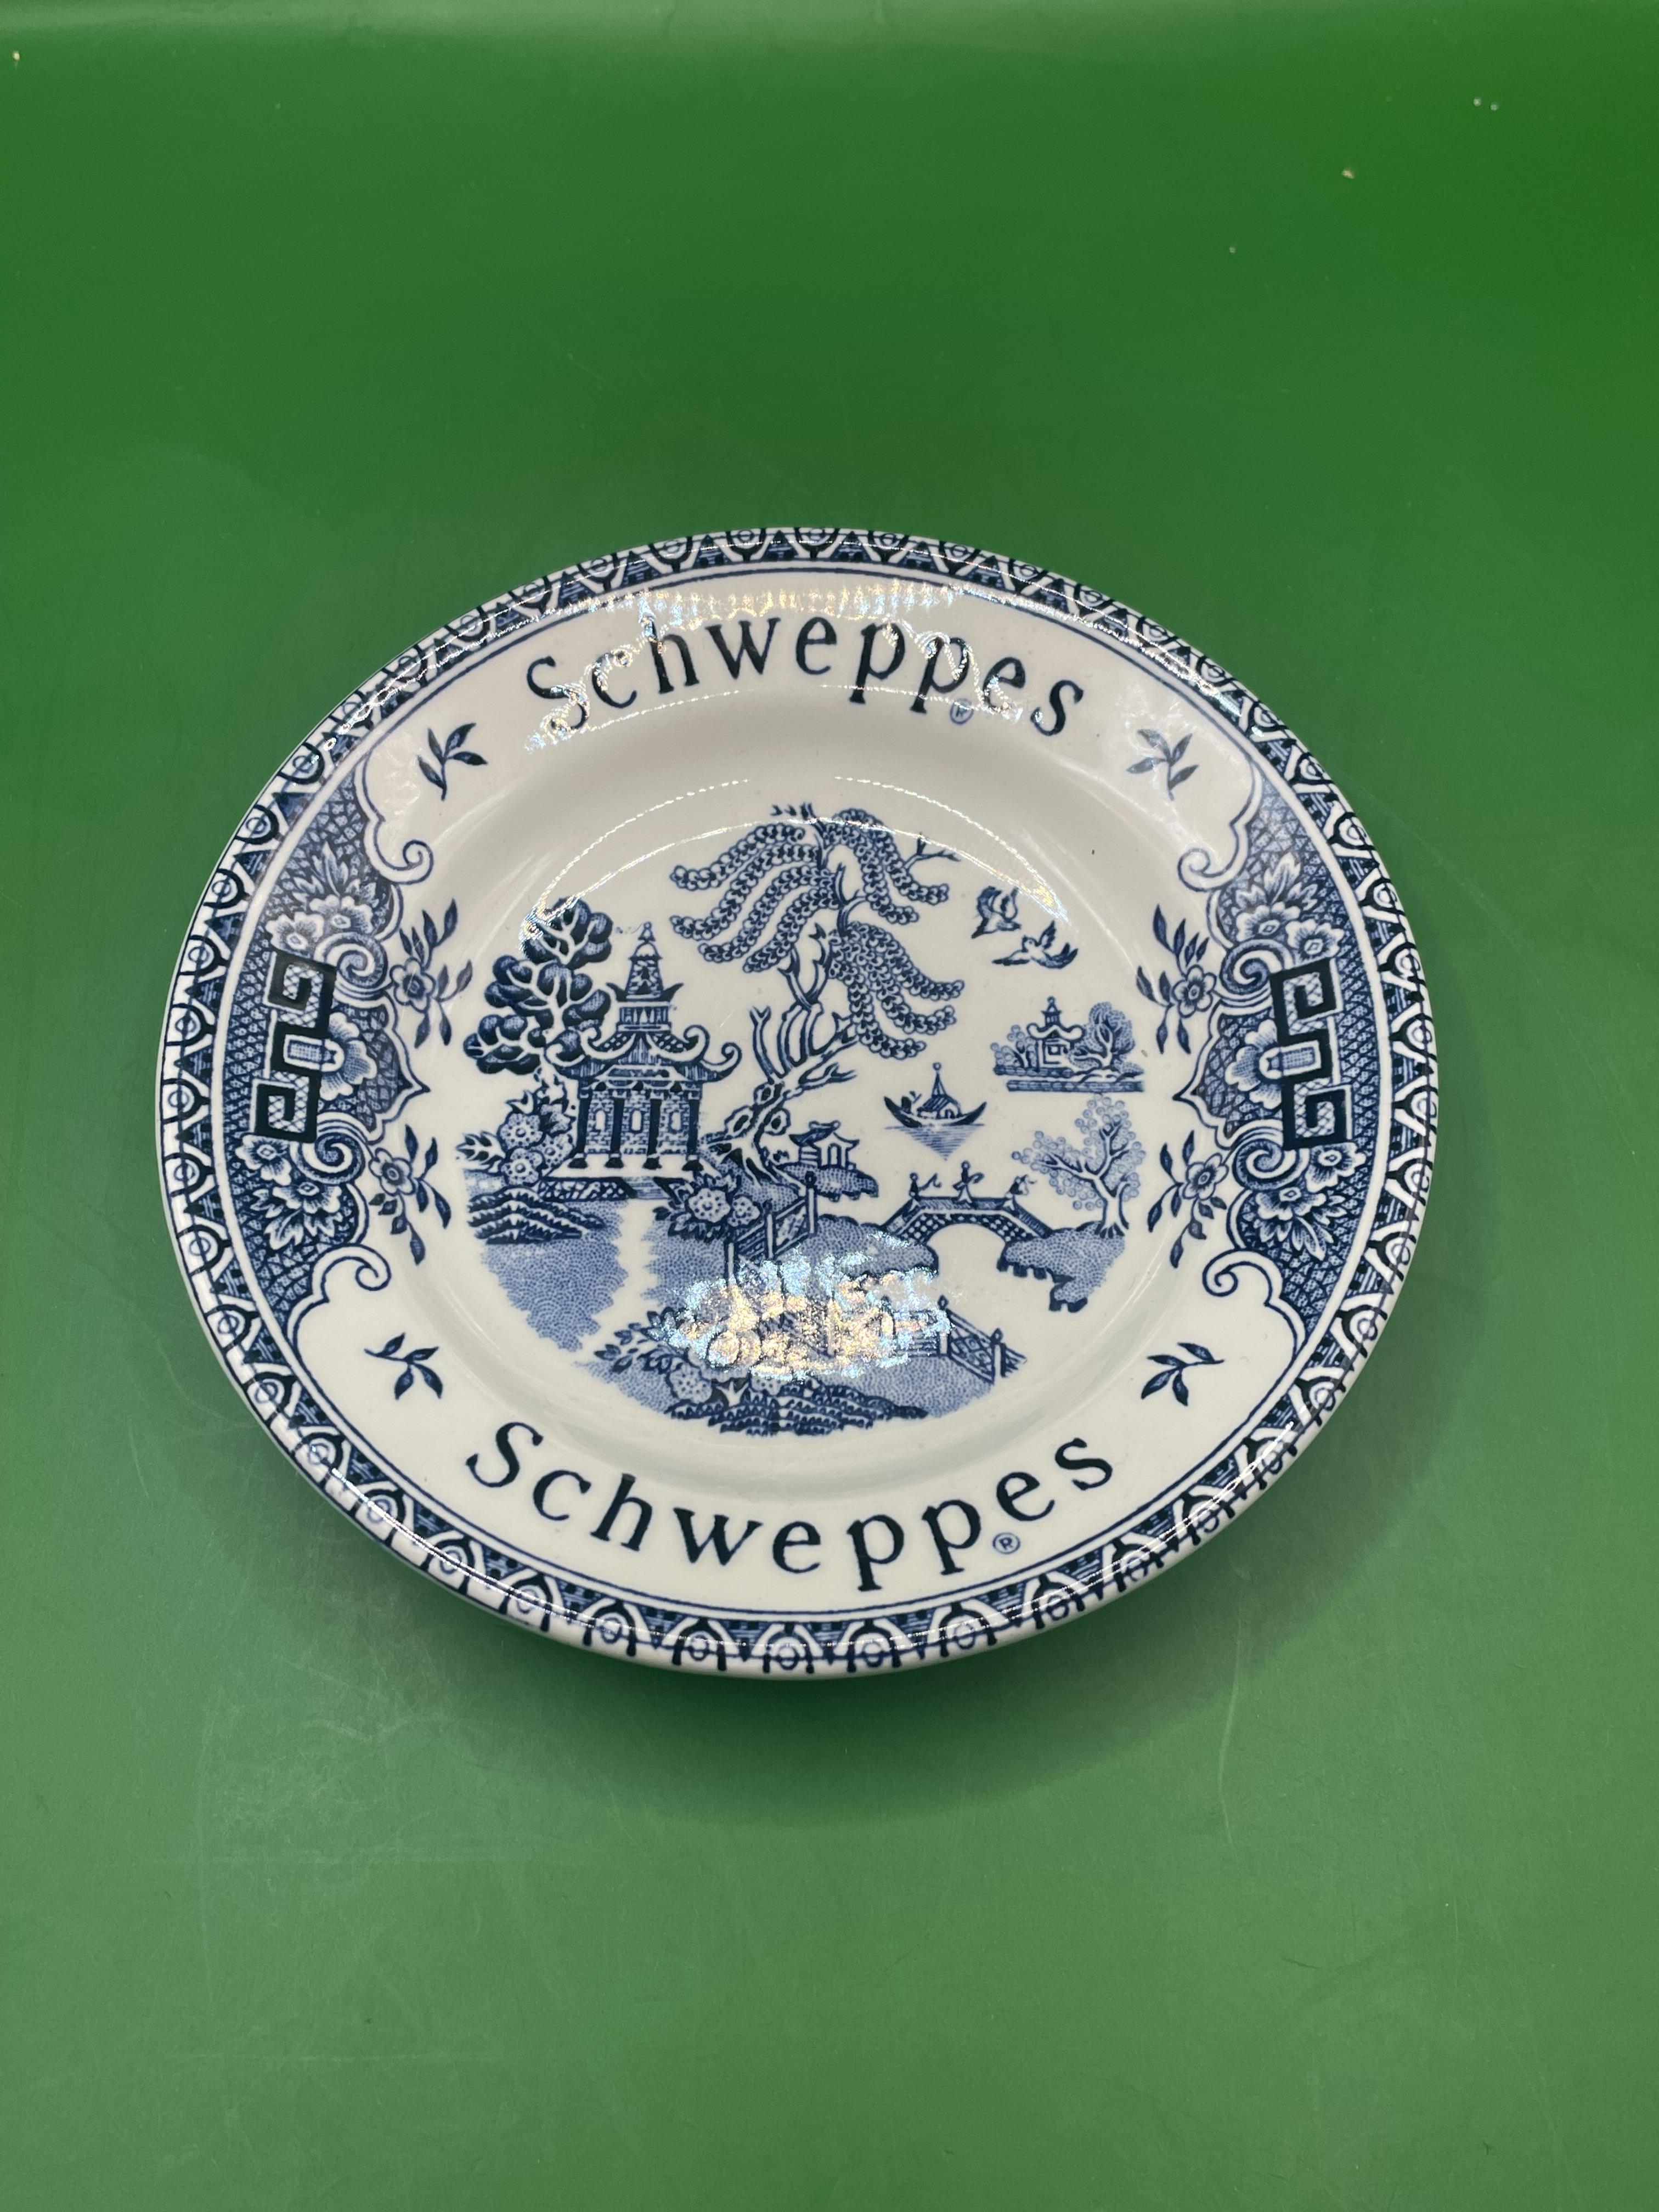 Vintage schweppes advertising plate with willow pattern blue and white made by Barrets  - Image 2 of 3